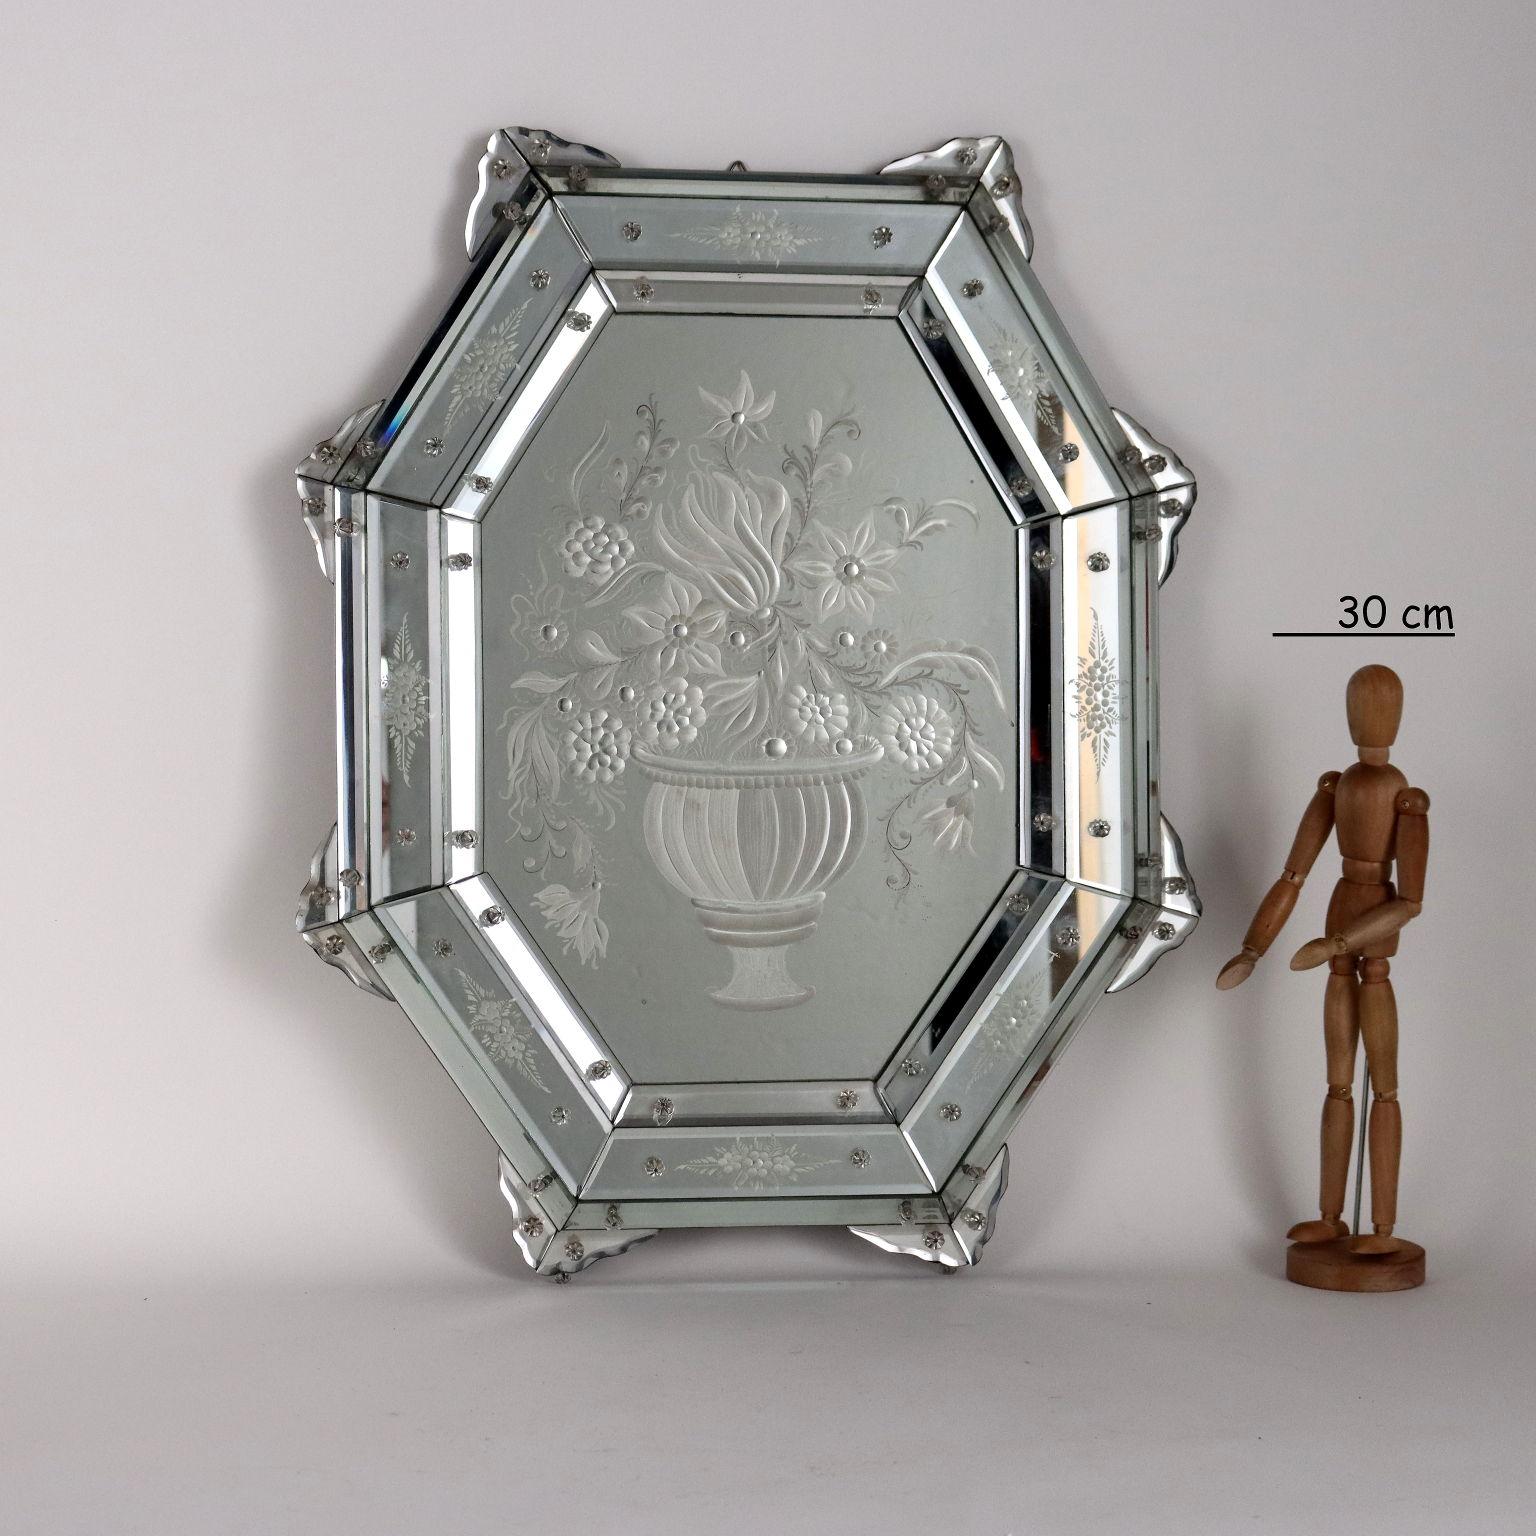 Central etched mirror to form depiction of vase with flowers echoing etched and beveled glass frames depicting floral motifs.
Italy early 20th century